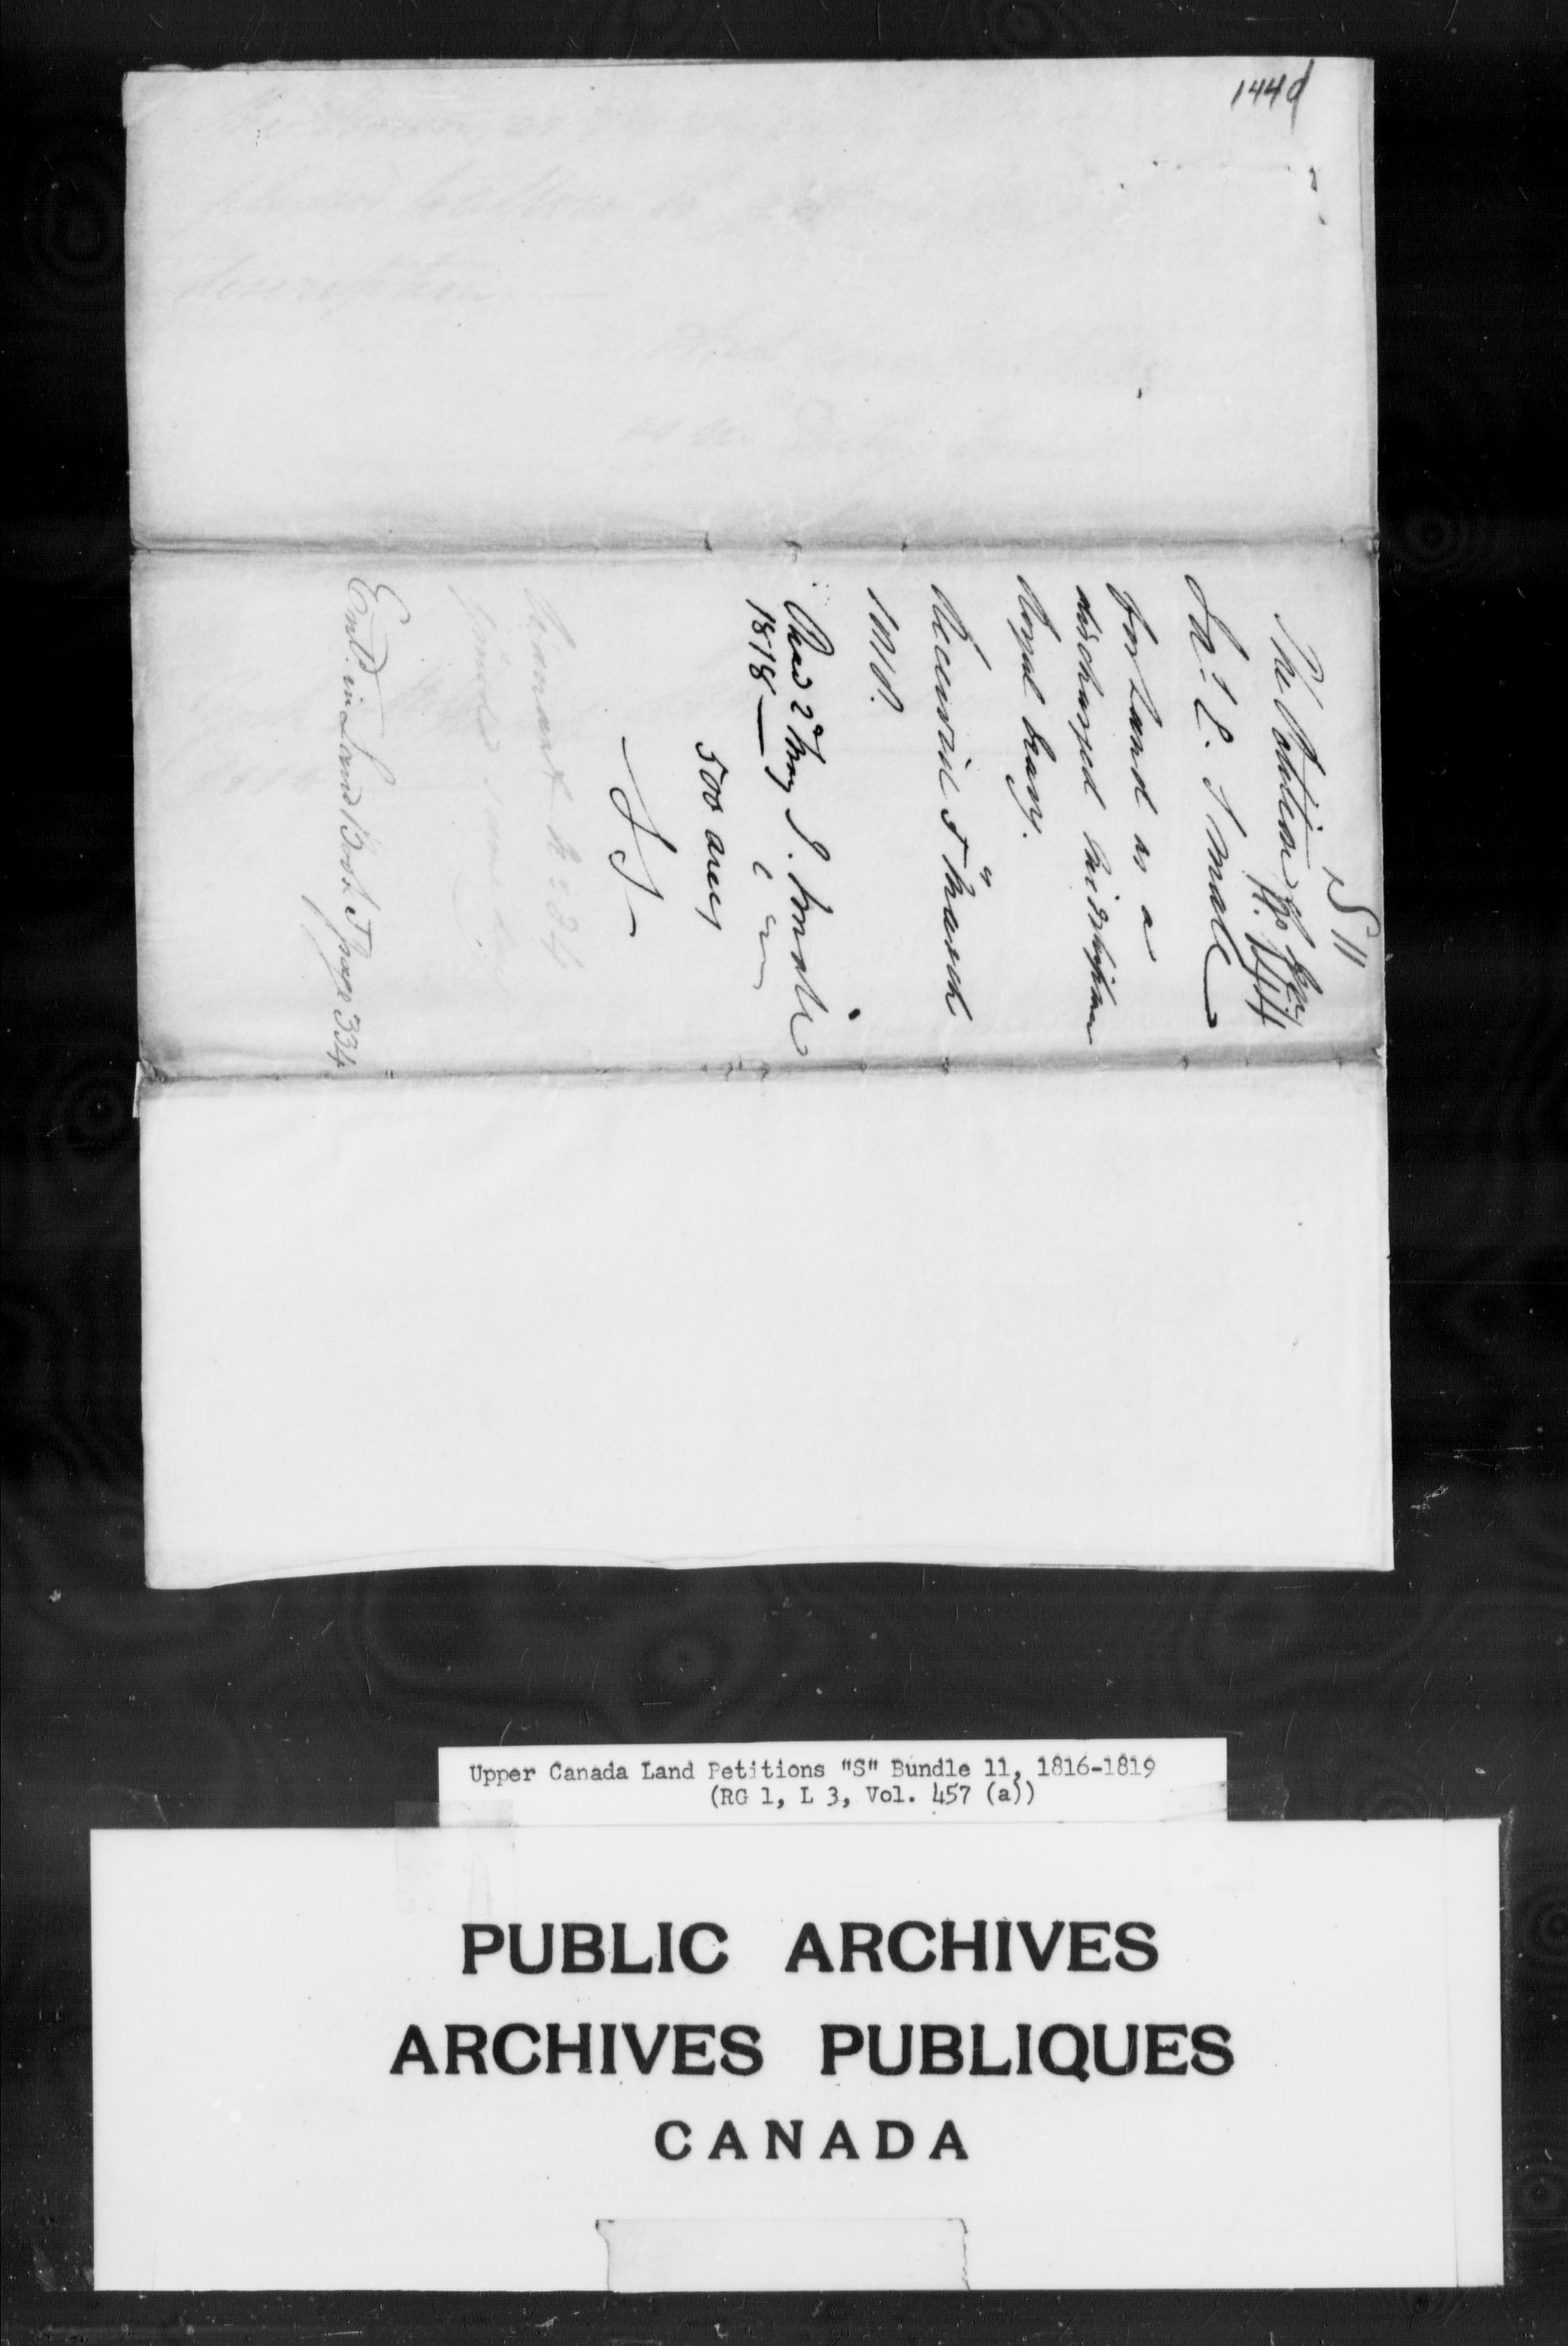 Title: Upper Canada Land Petitions (1763-1865) - Mikan Number: 205131 - Microform: c-2811